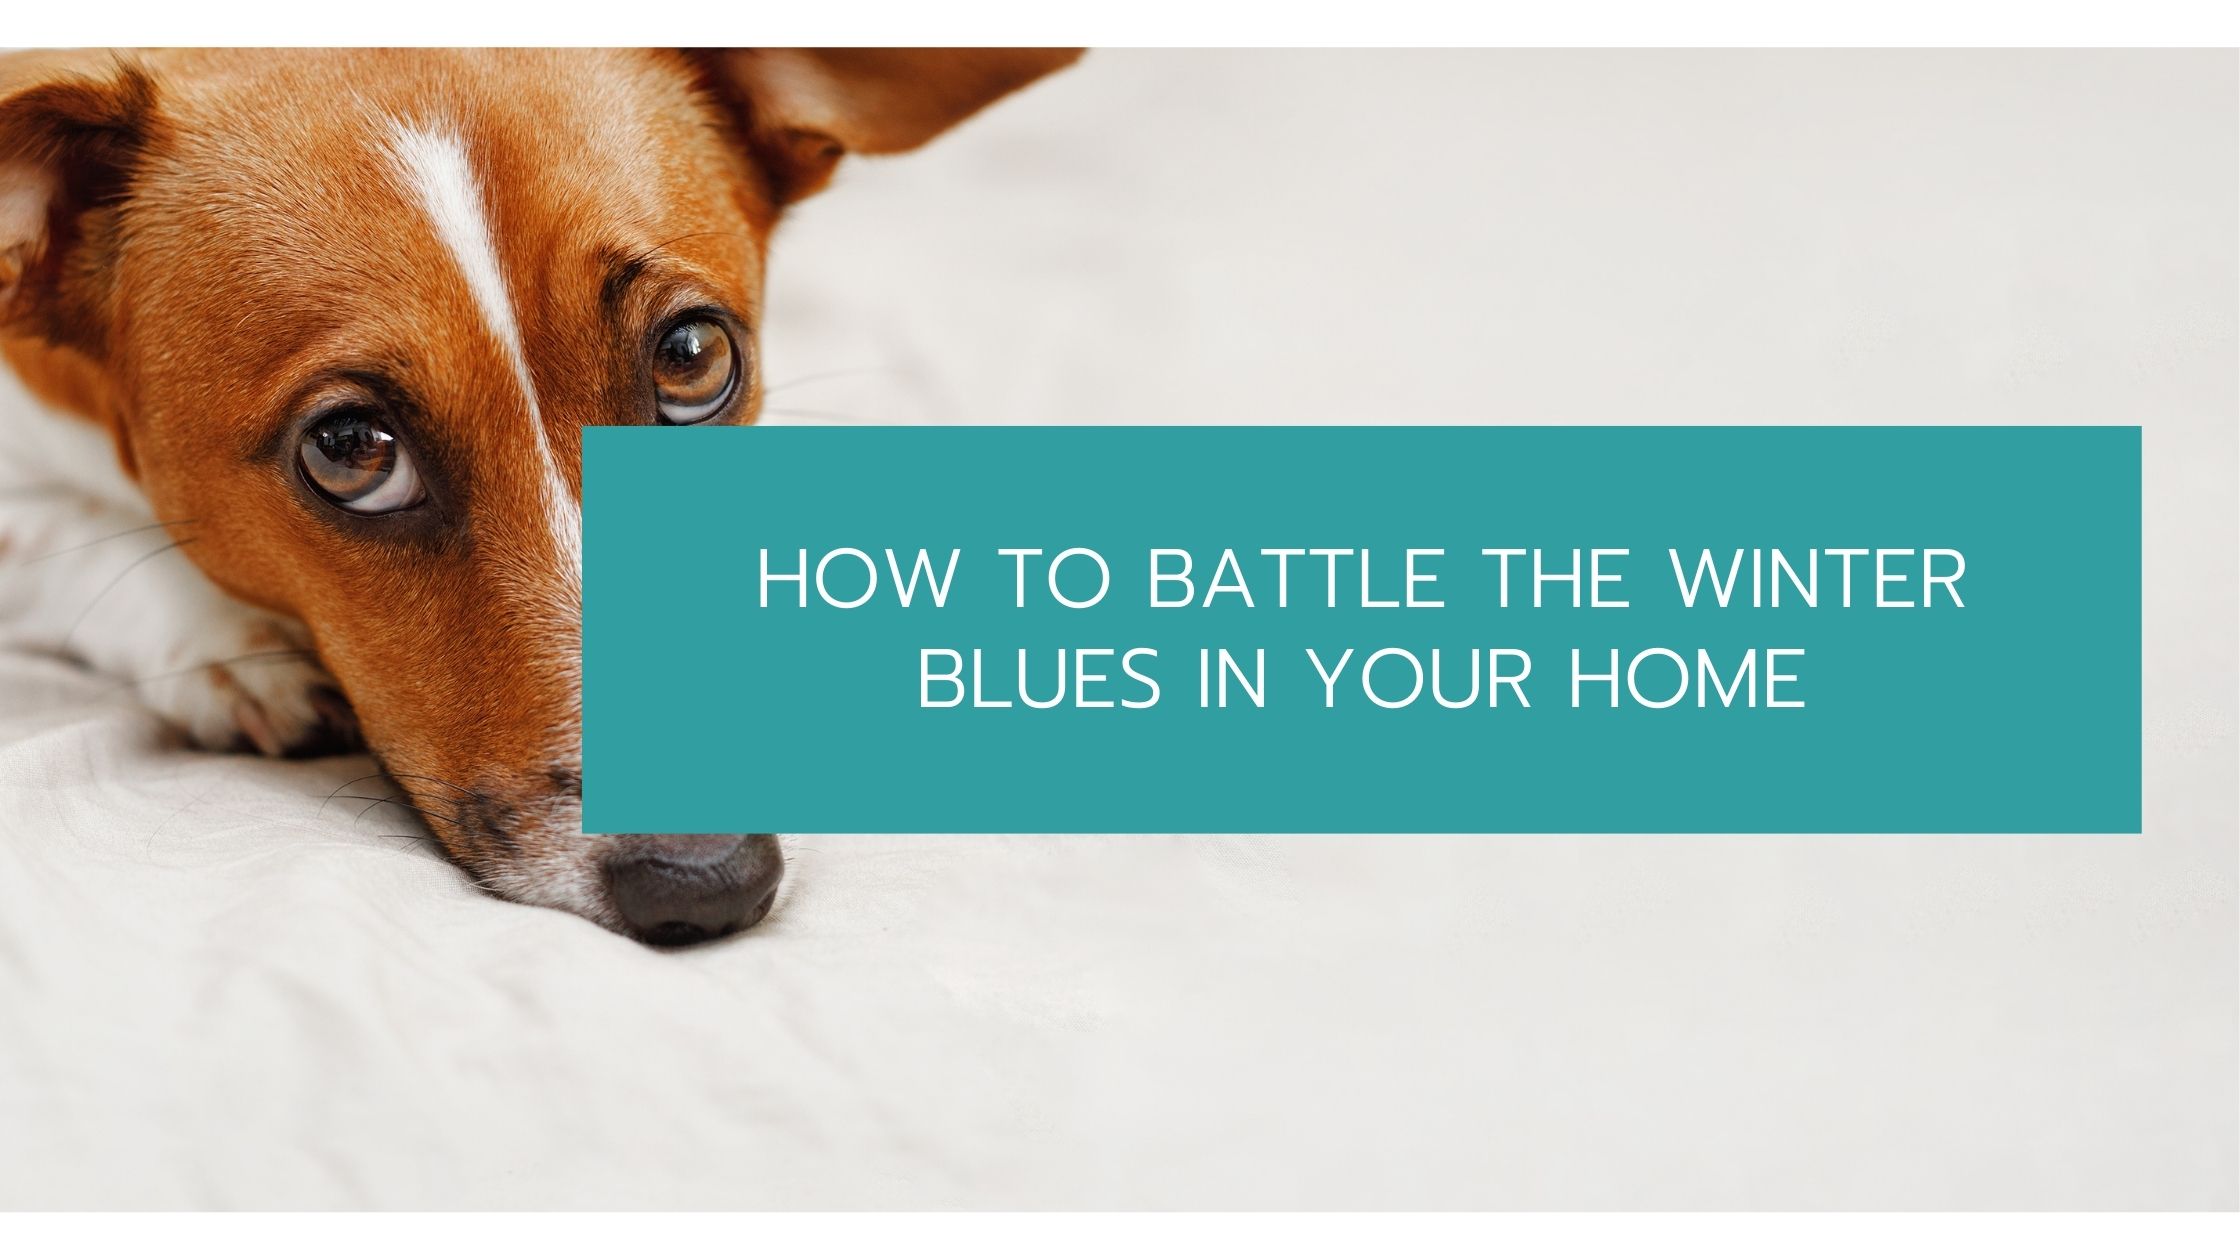 How To Battle The Winter Blues In Your Home